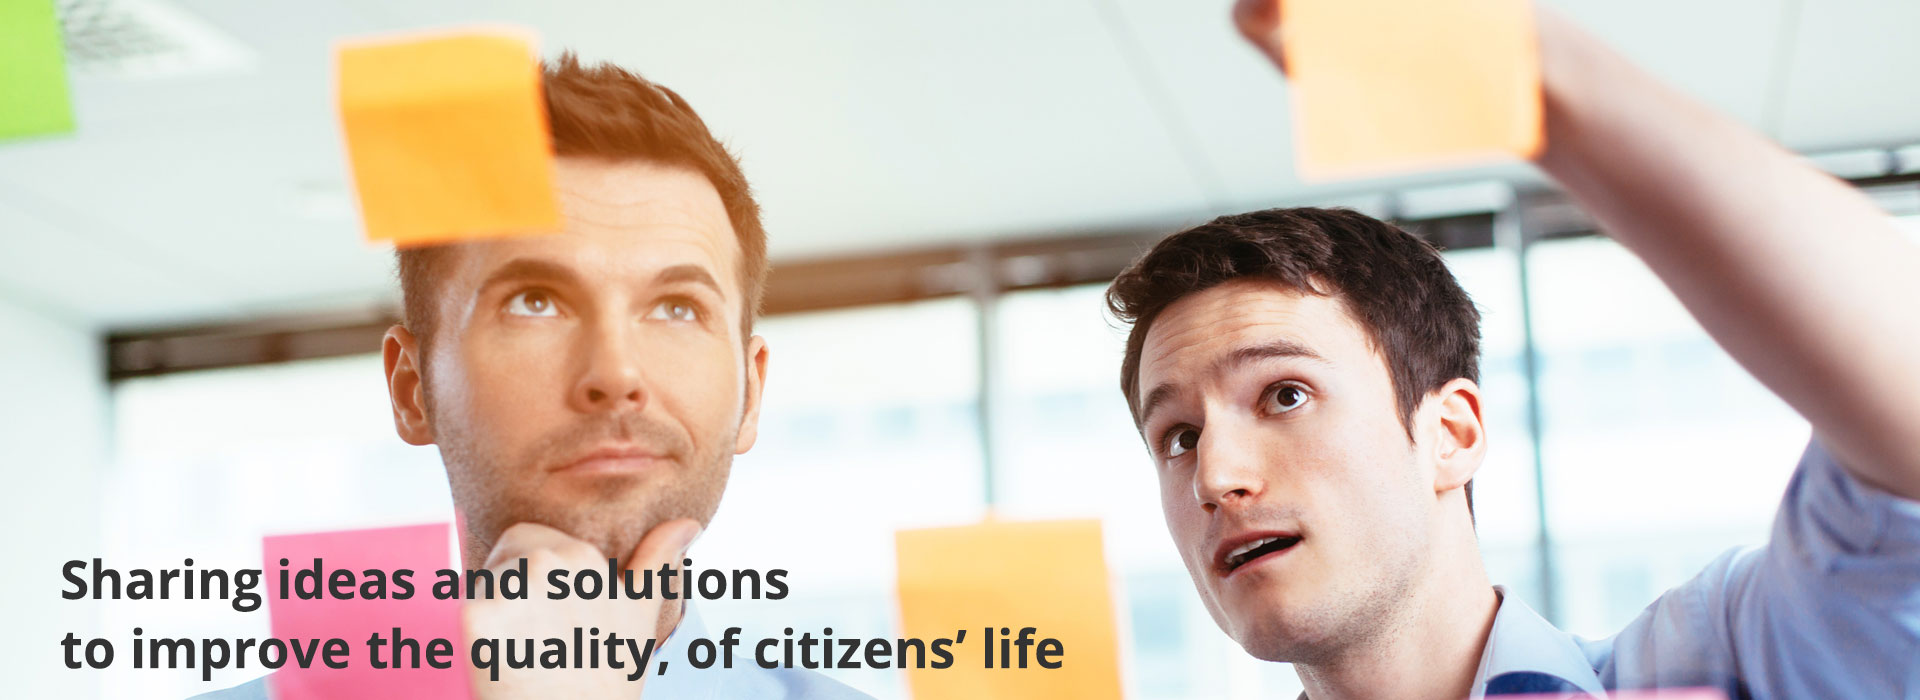 sharing ideas and solutions to improve the quality, of citizens’ life